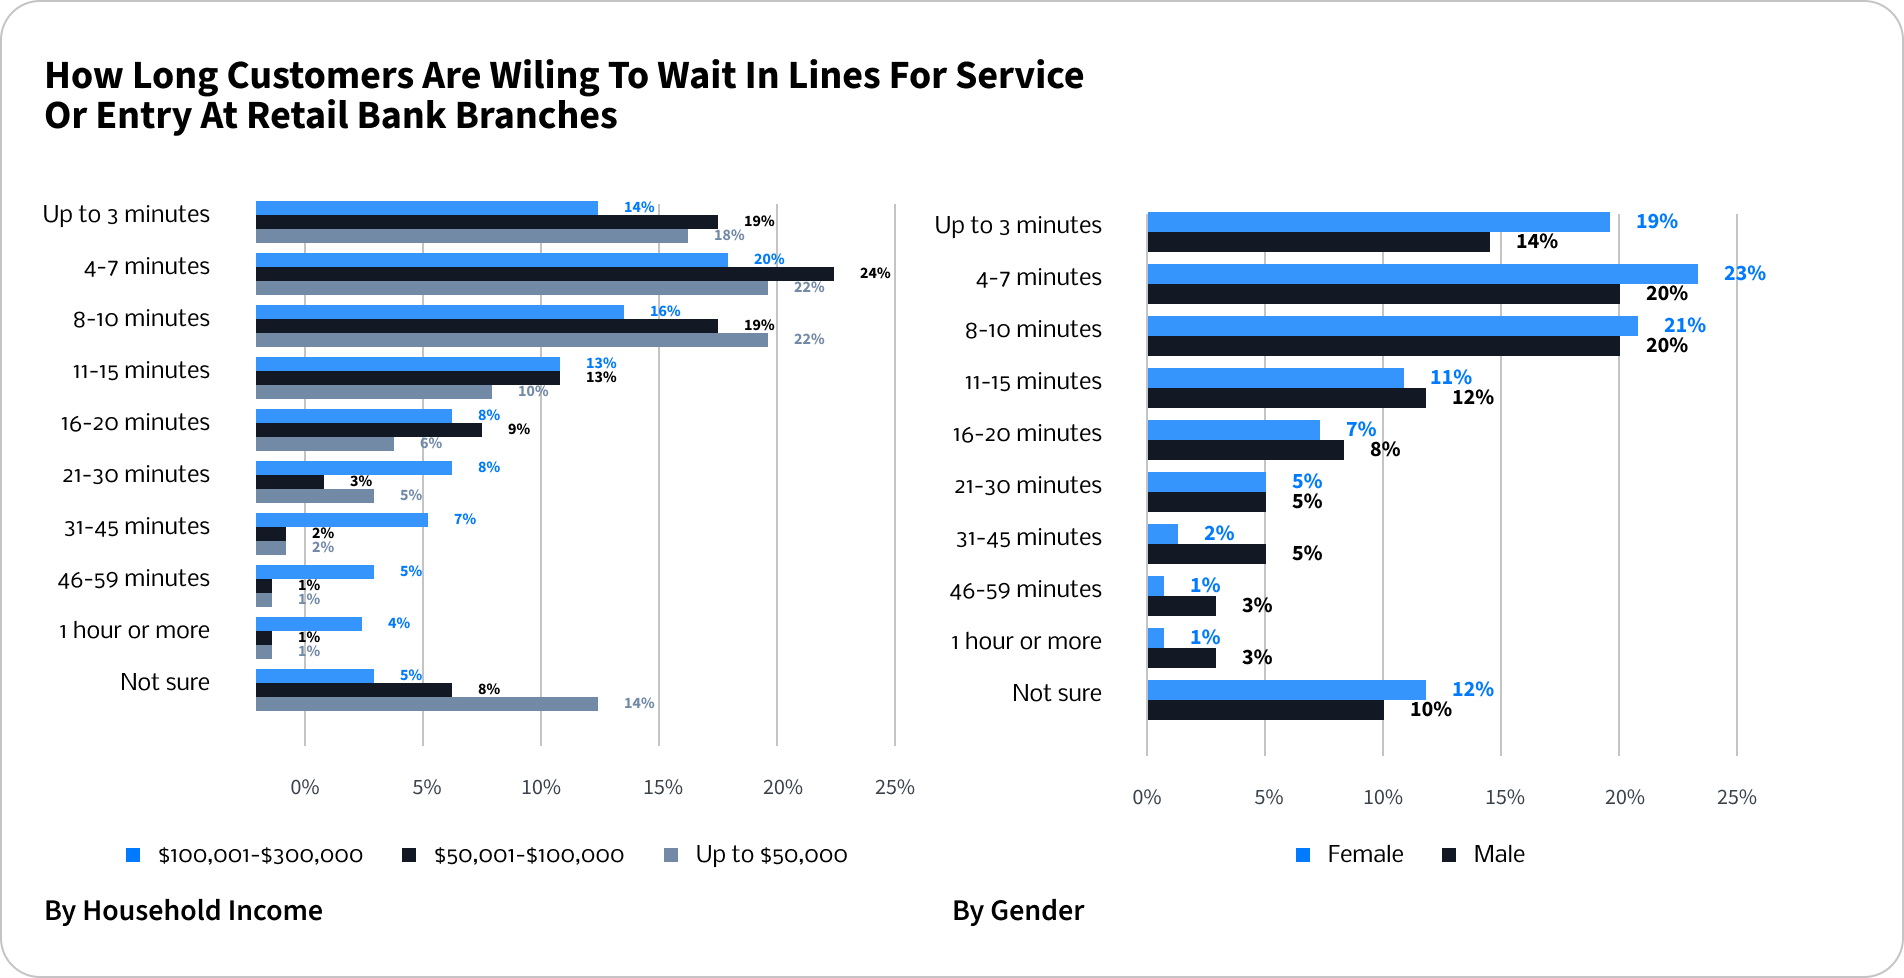 How long customers are willing to wait in lines for service or entry at retail bank branches chart